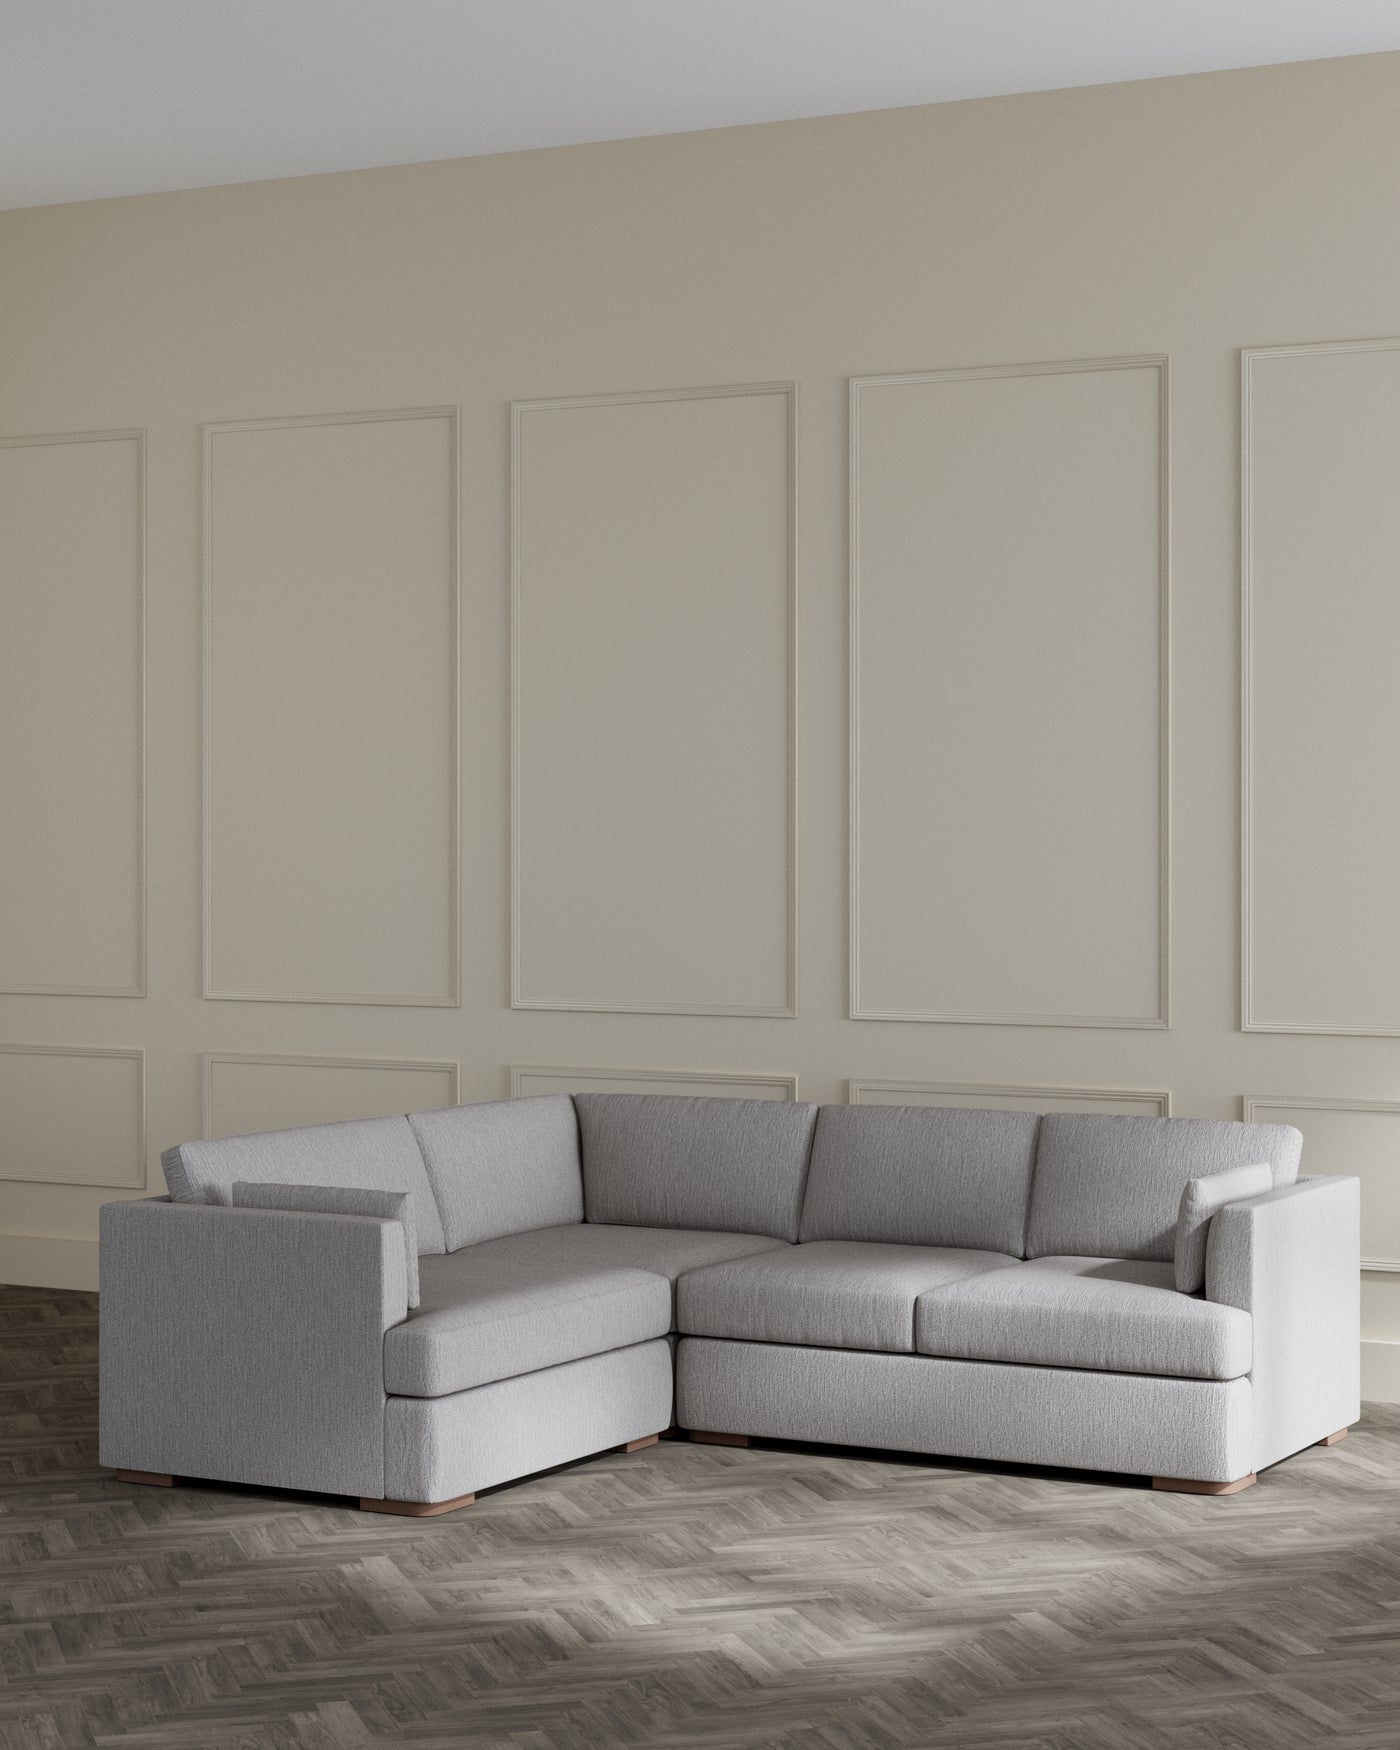 Contemporary light grey fabric L-shaped sectional sofa with clean lines and plush cushions, elegantly resting on a wooden floor against a panelled wall.